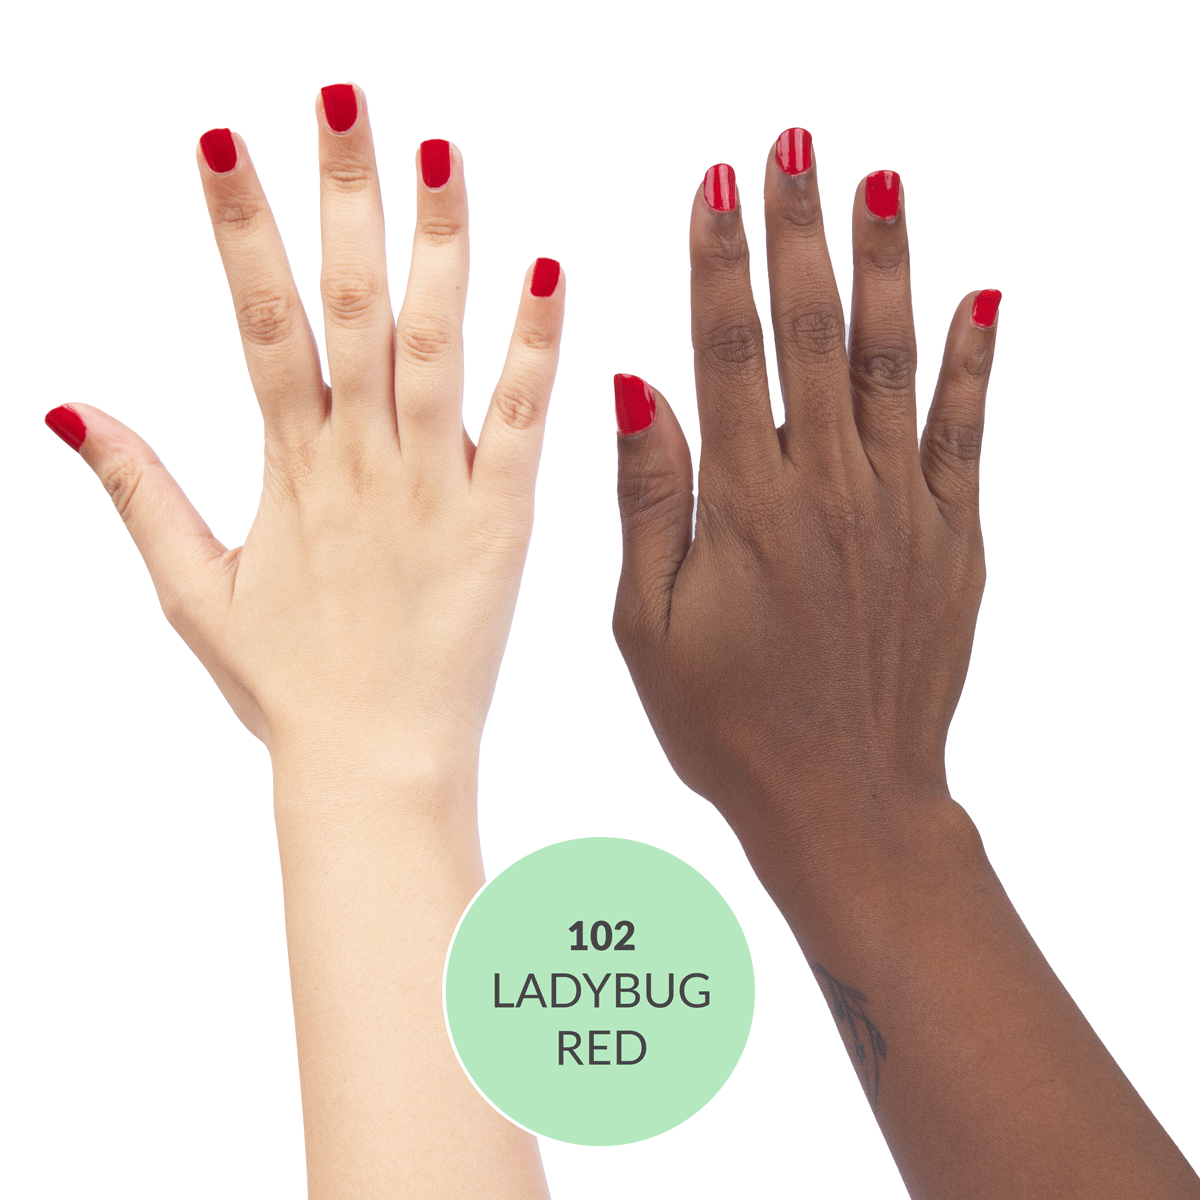 Ladybug Red 102, 21 TOXIN FREE | WITH AHA & LOTUS EXTRACT | INTENSE COLOR | 9 ml